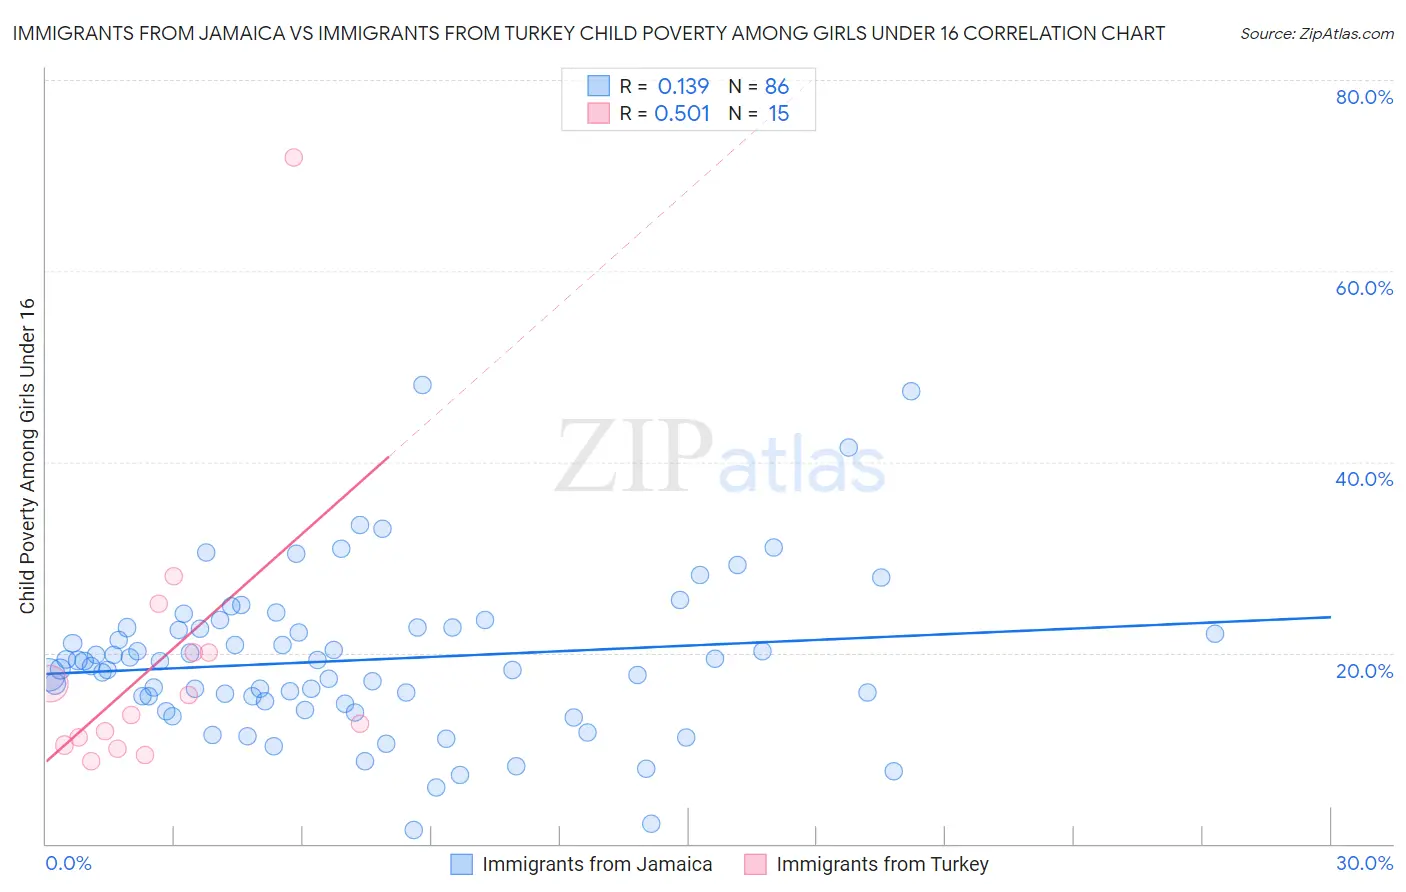 Immigrants from Jamaica vs Immigrants from Turkey Child Poverty Among Girls Under 16